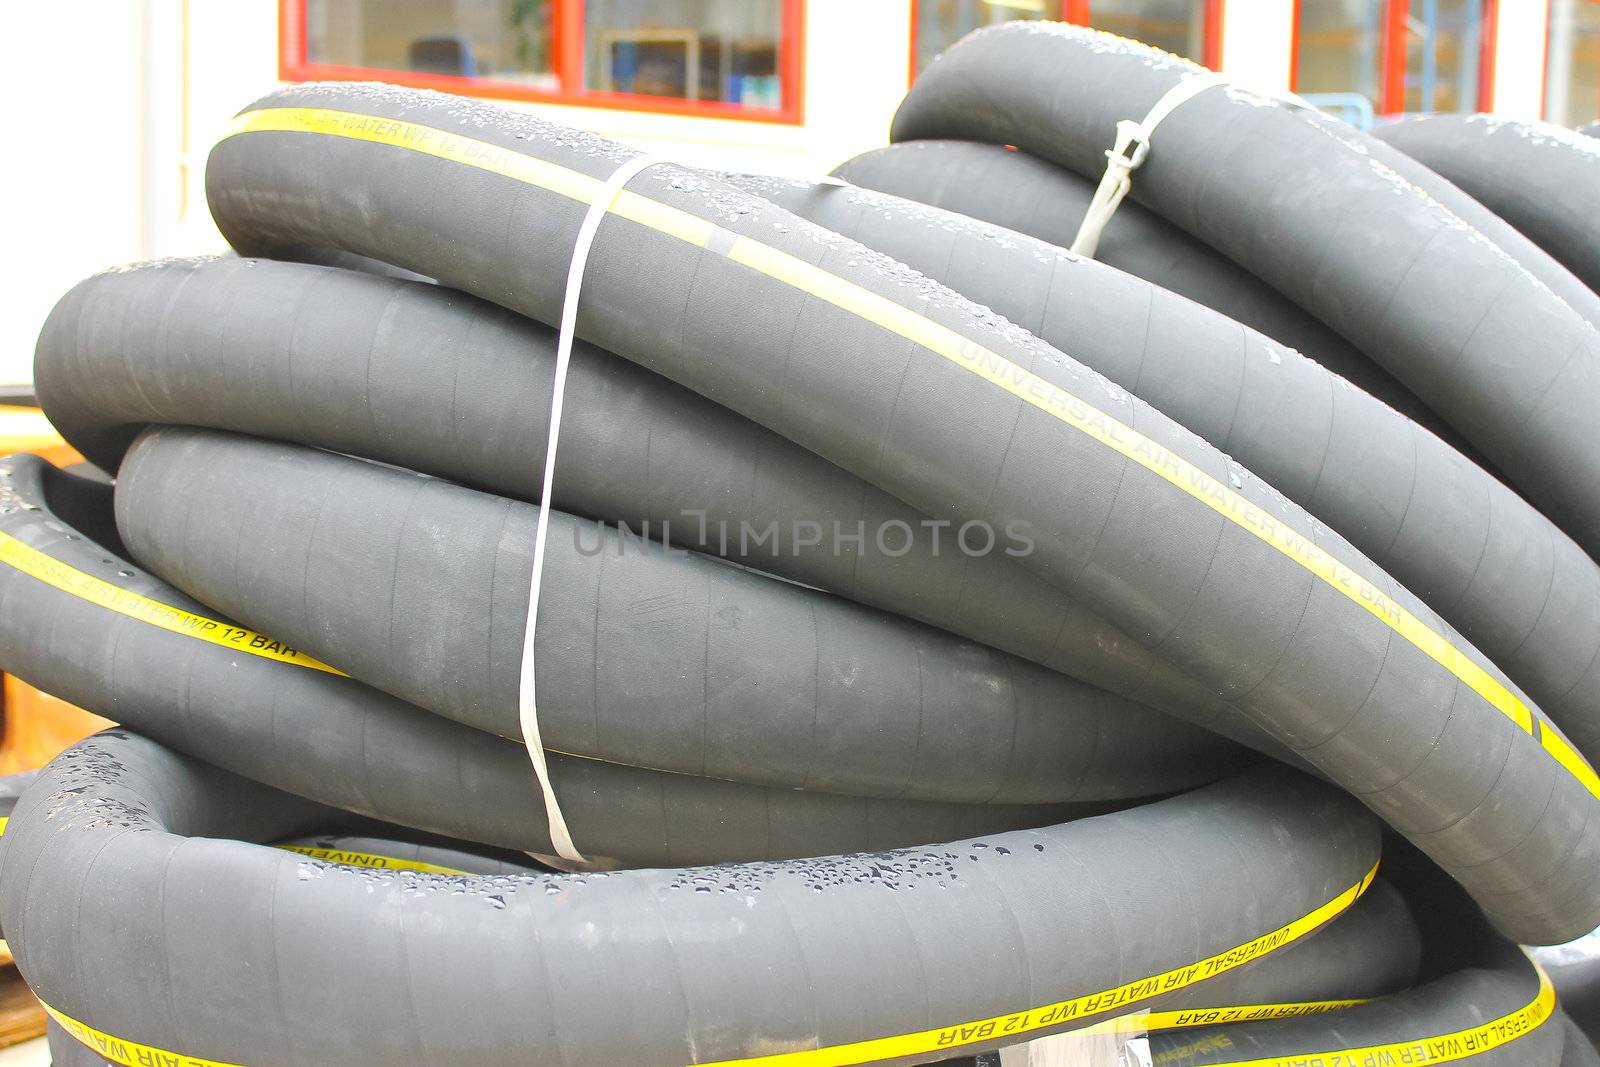 Rubber tube of large diameter from stock company by NickNick